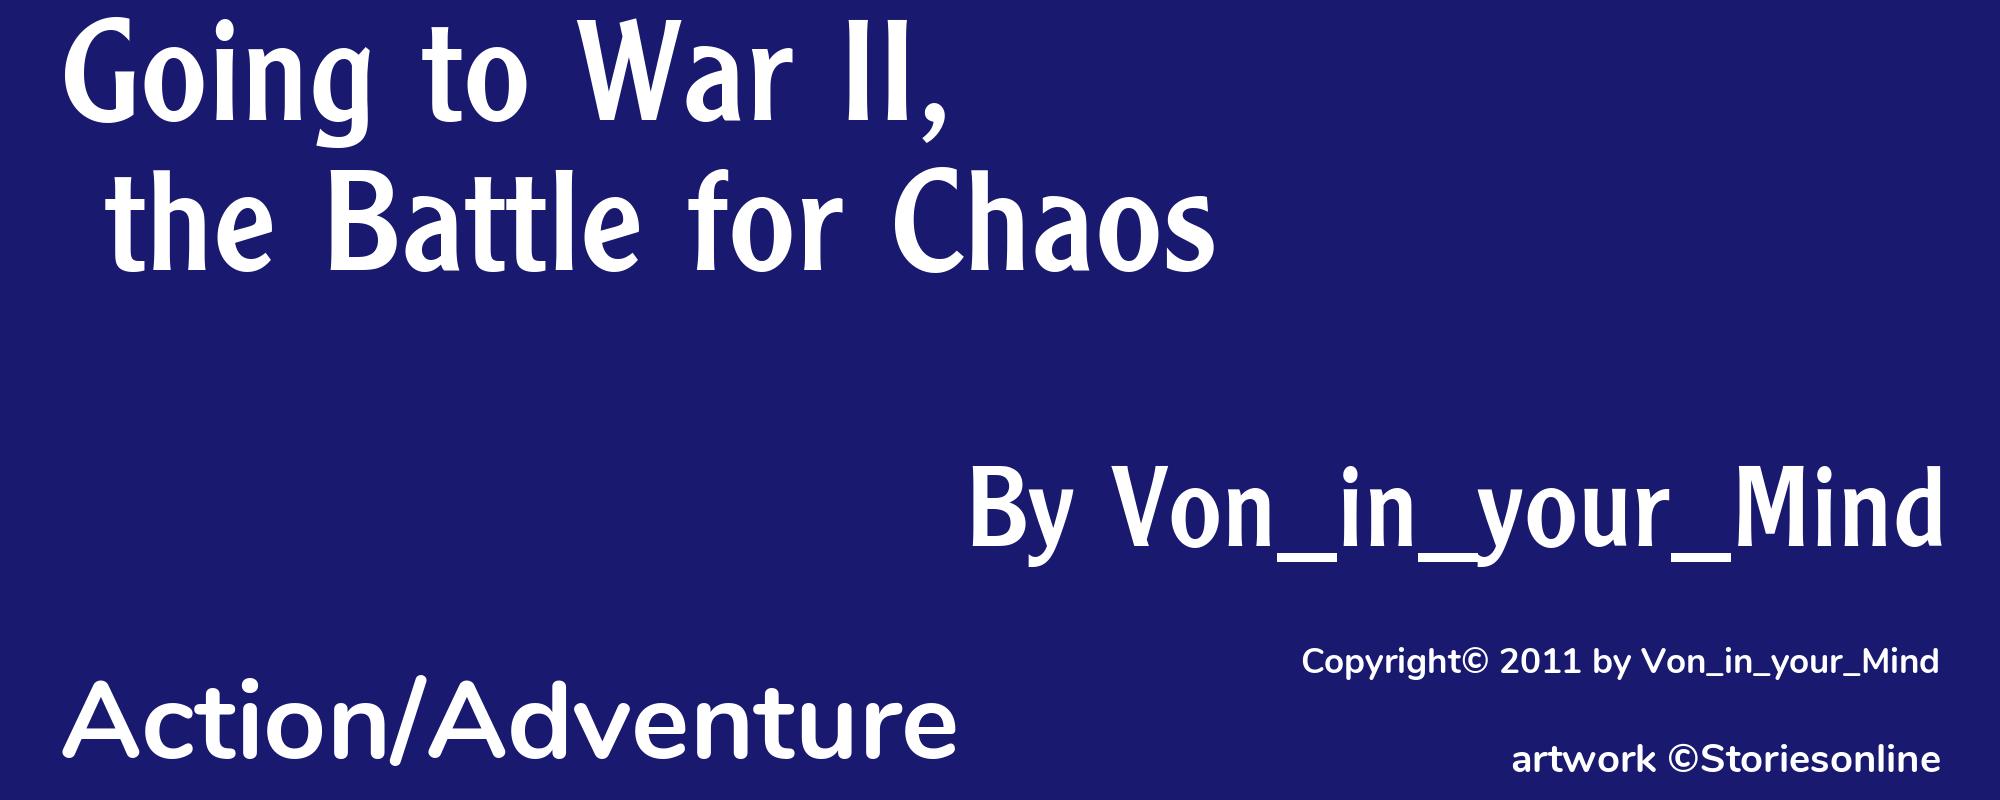 Going to War II, the Battle for Chaos - Cover